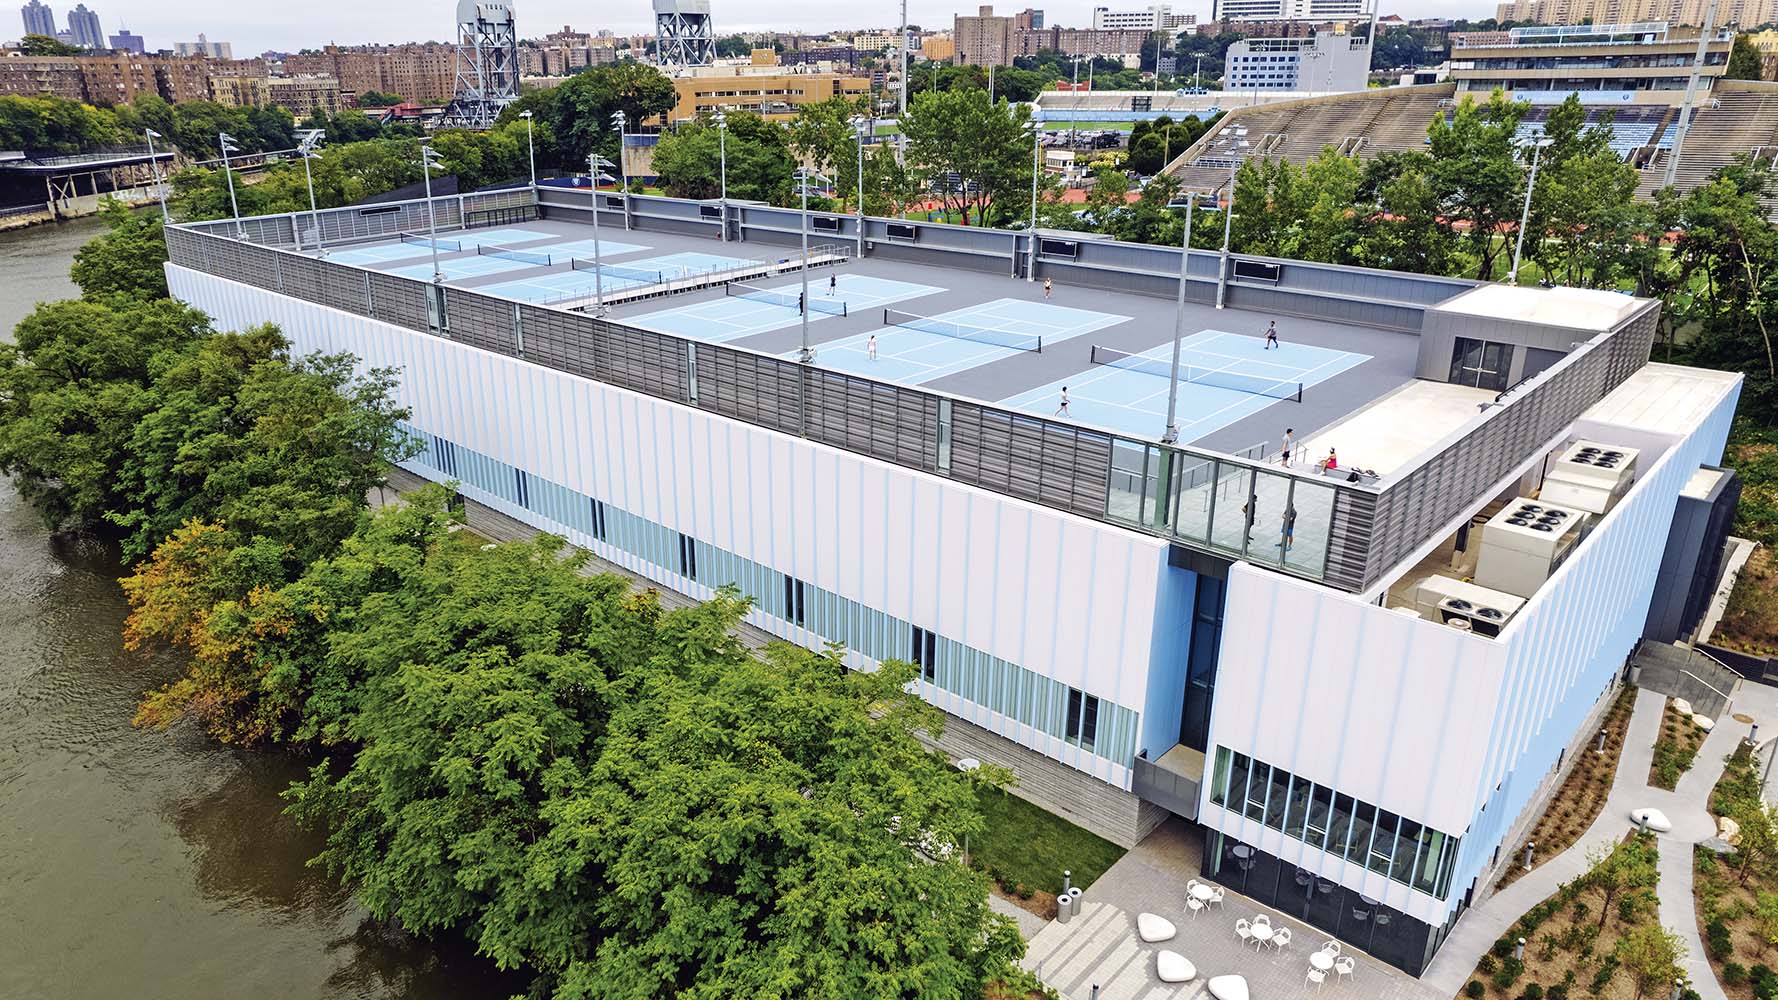 Perkins&Will's No-Nonsense Tennis Center for Columbia University Adapts to Climate Challenges